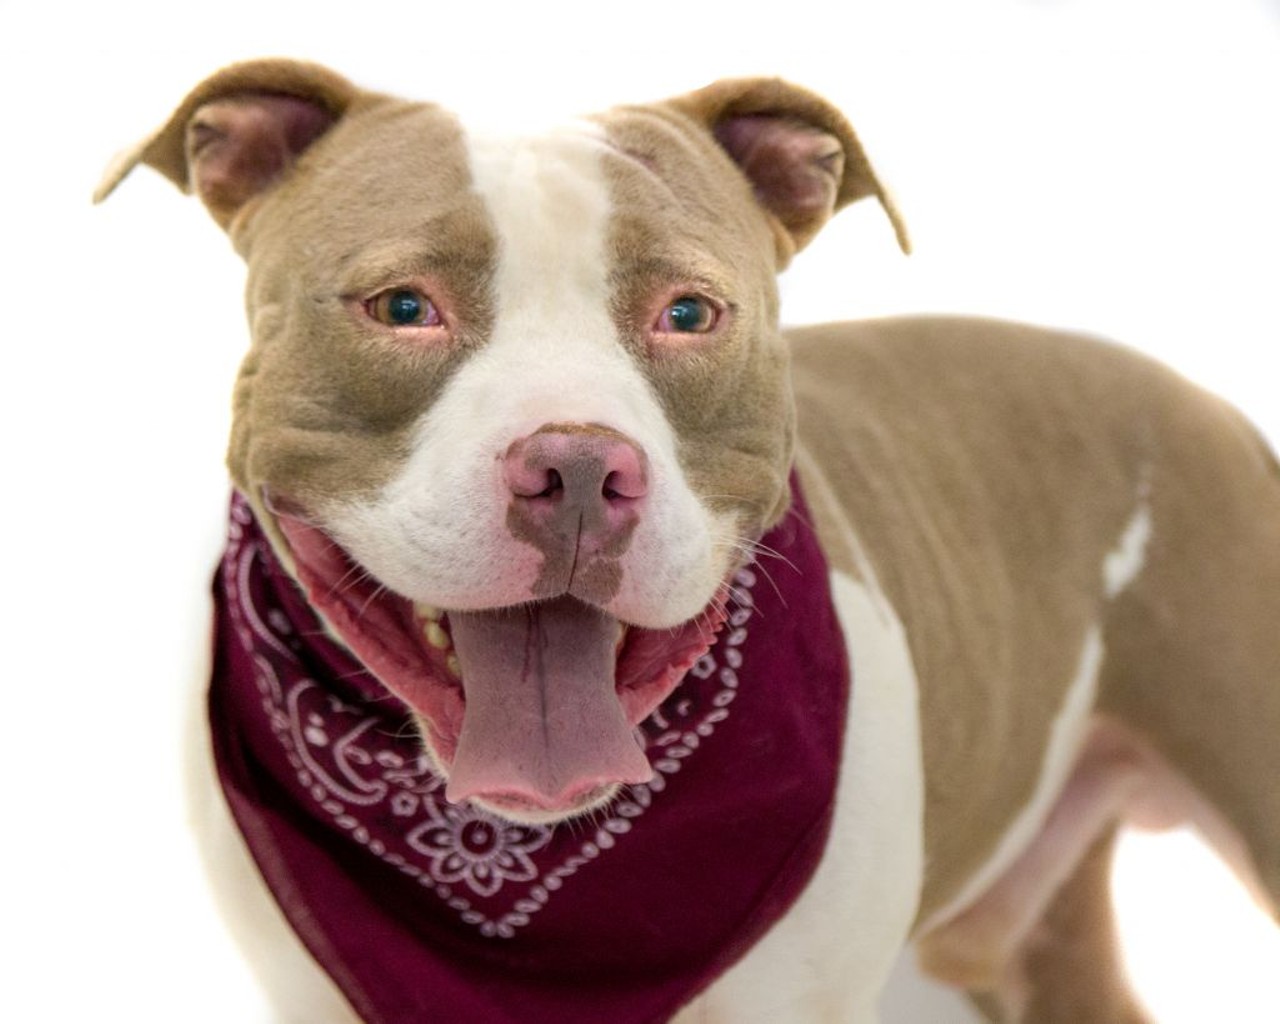 16 adoptable pooches ready to meet you at Orange County Animal Services